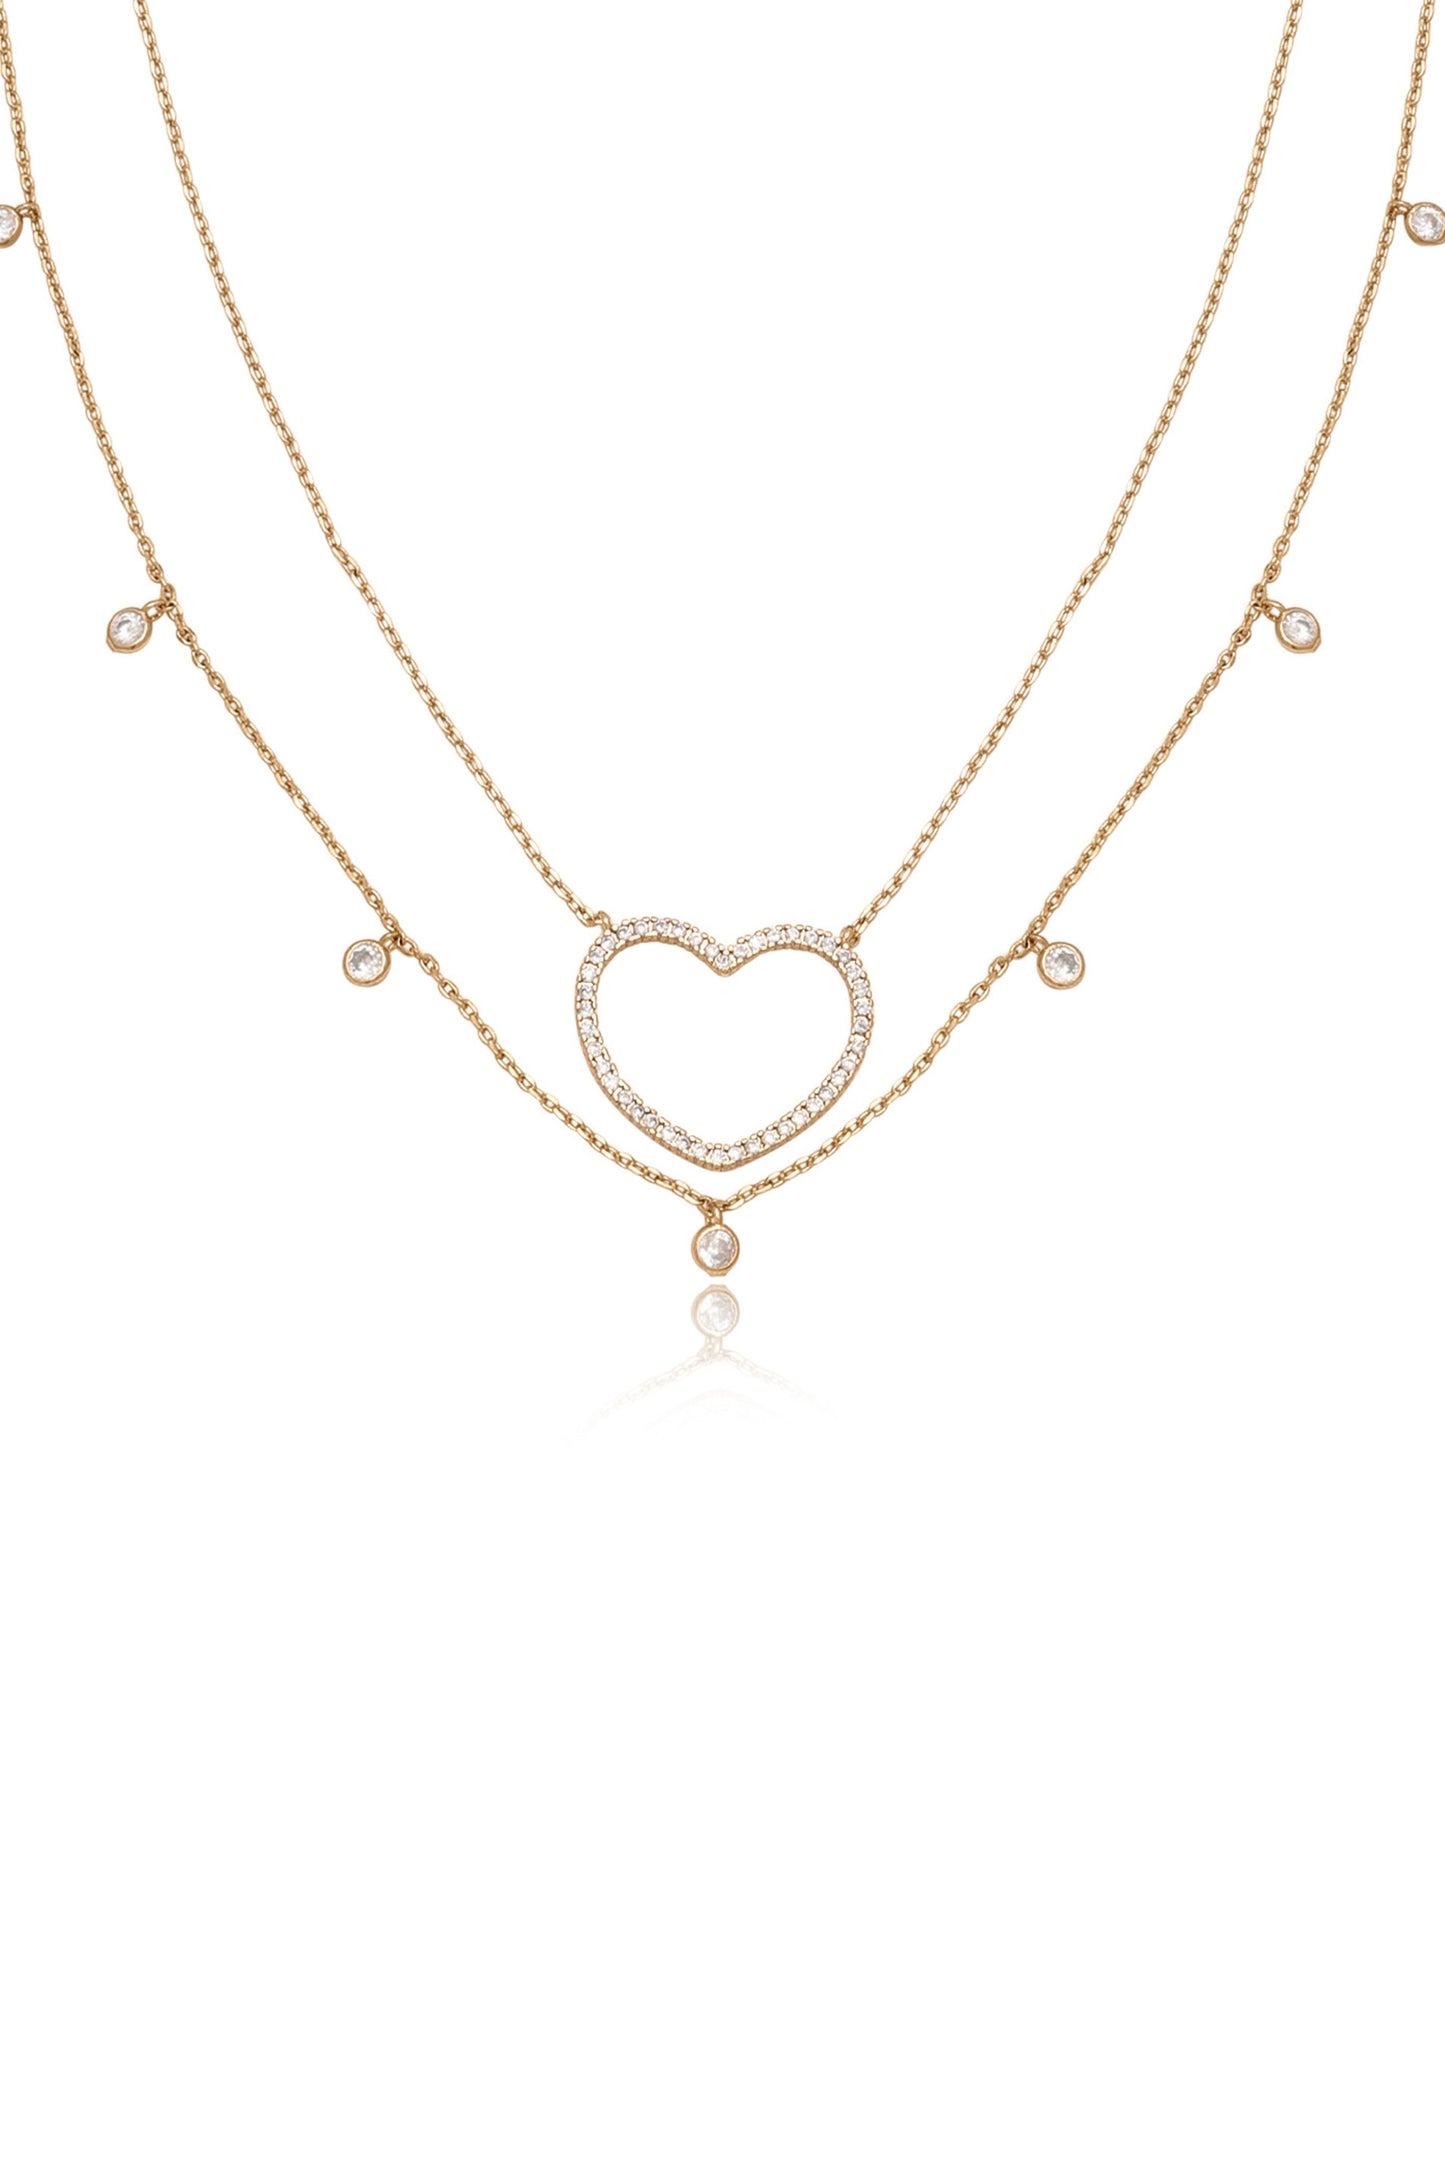 Crystal Heart and Drop Layered 18k Gold Plated Necklace Set of 2 close